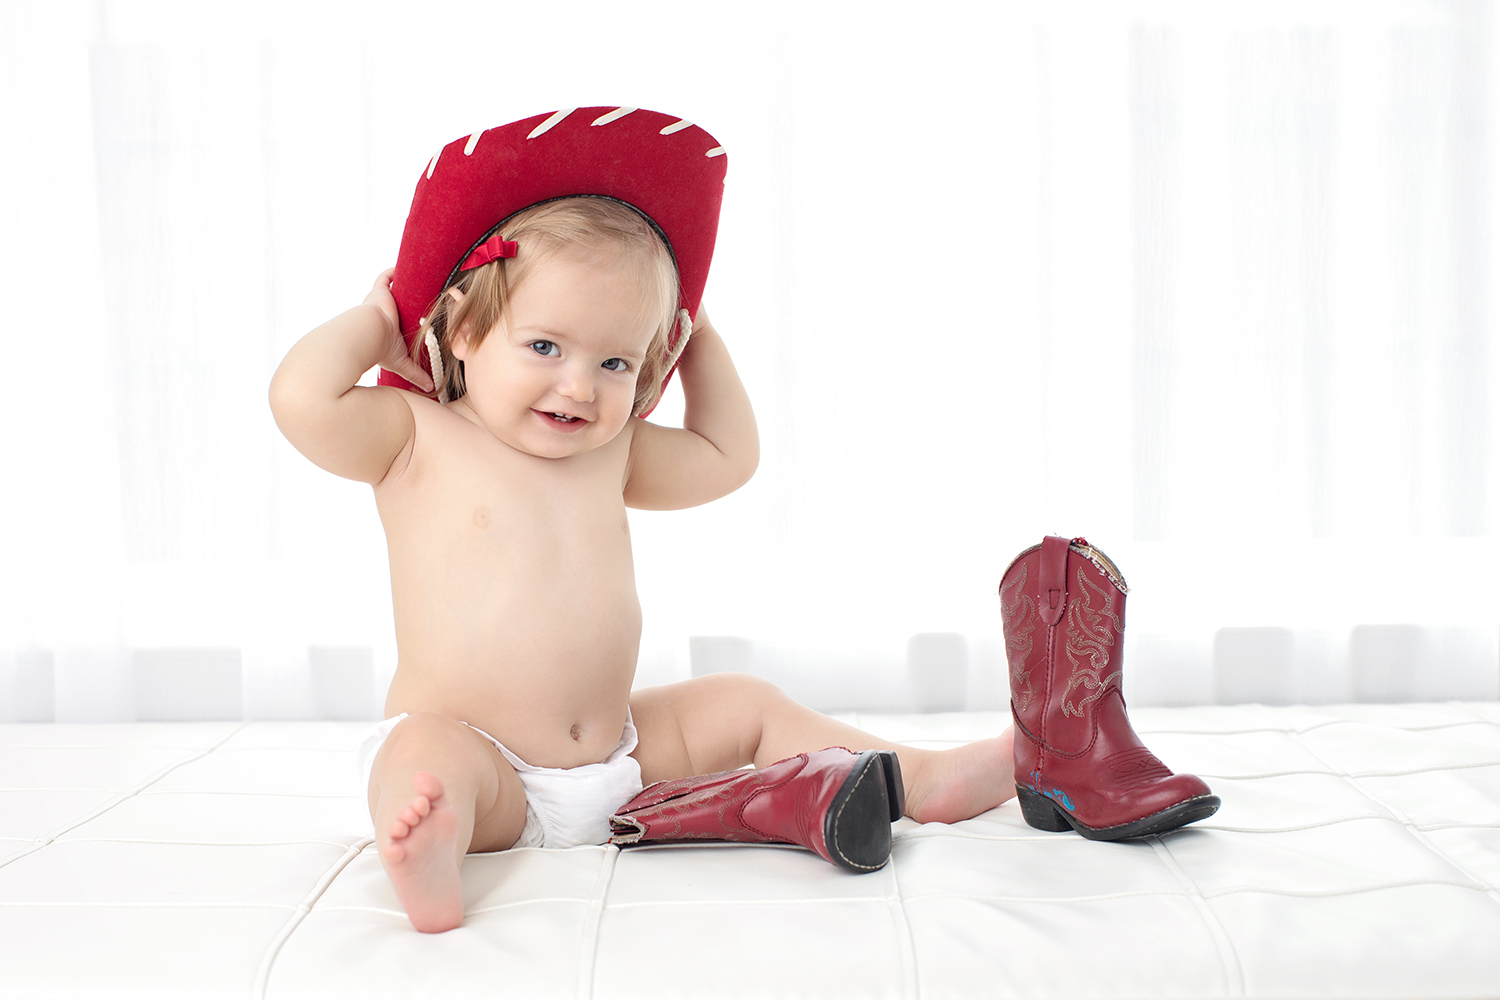 A charming baby sits in a red cowboy hat with boots